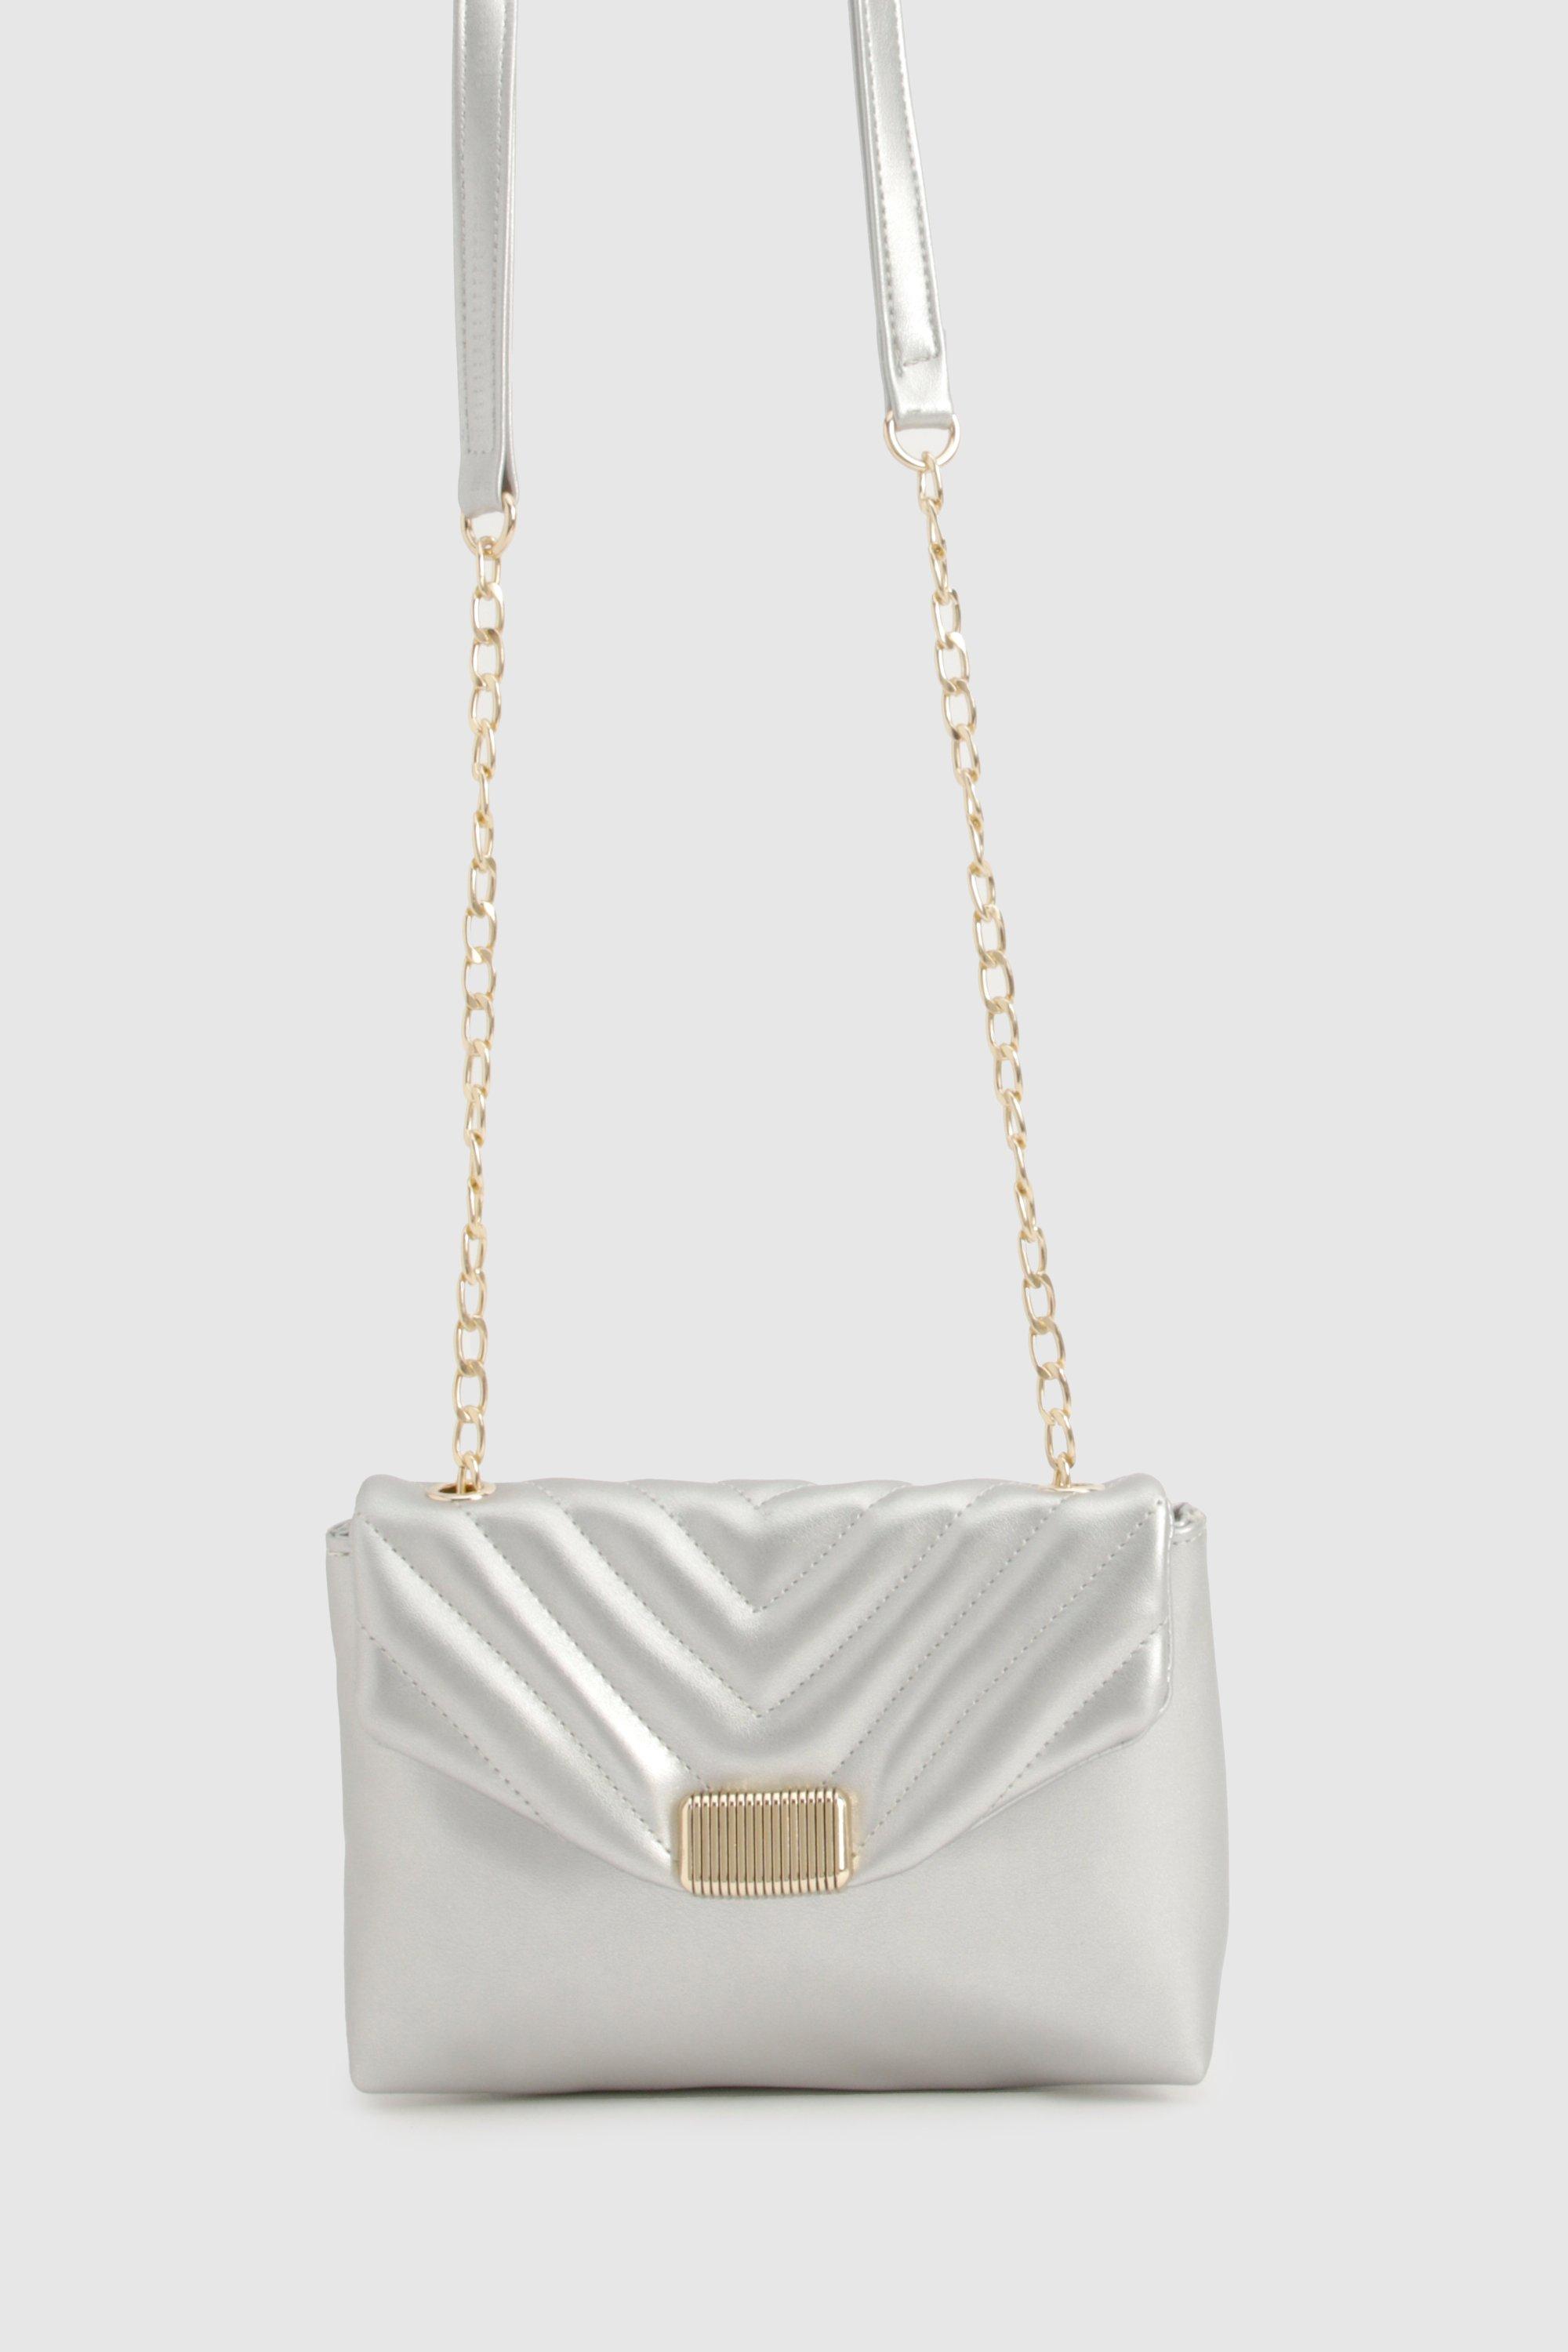 Image of Silver Quilted Cross Body Bag, Grigio